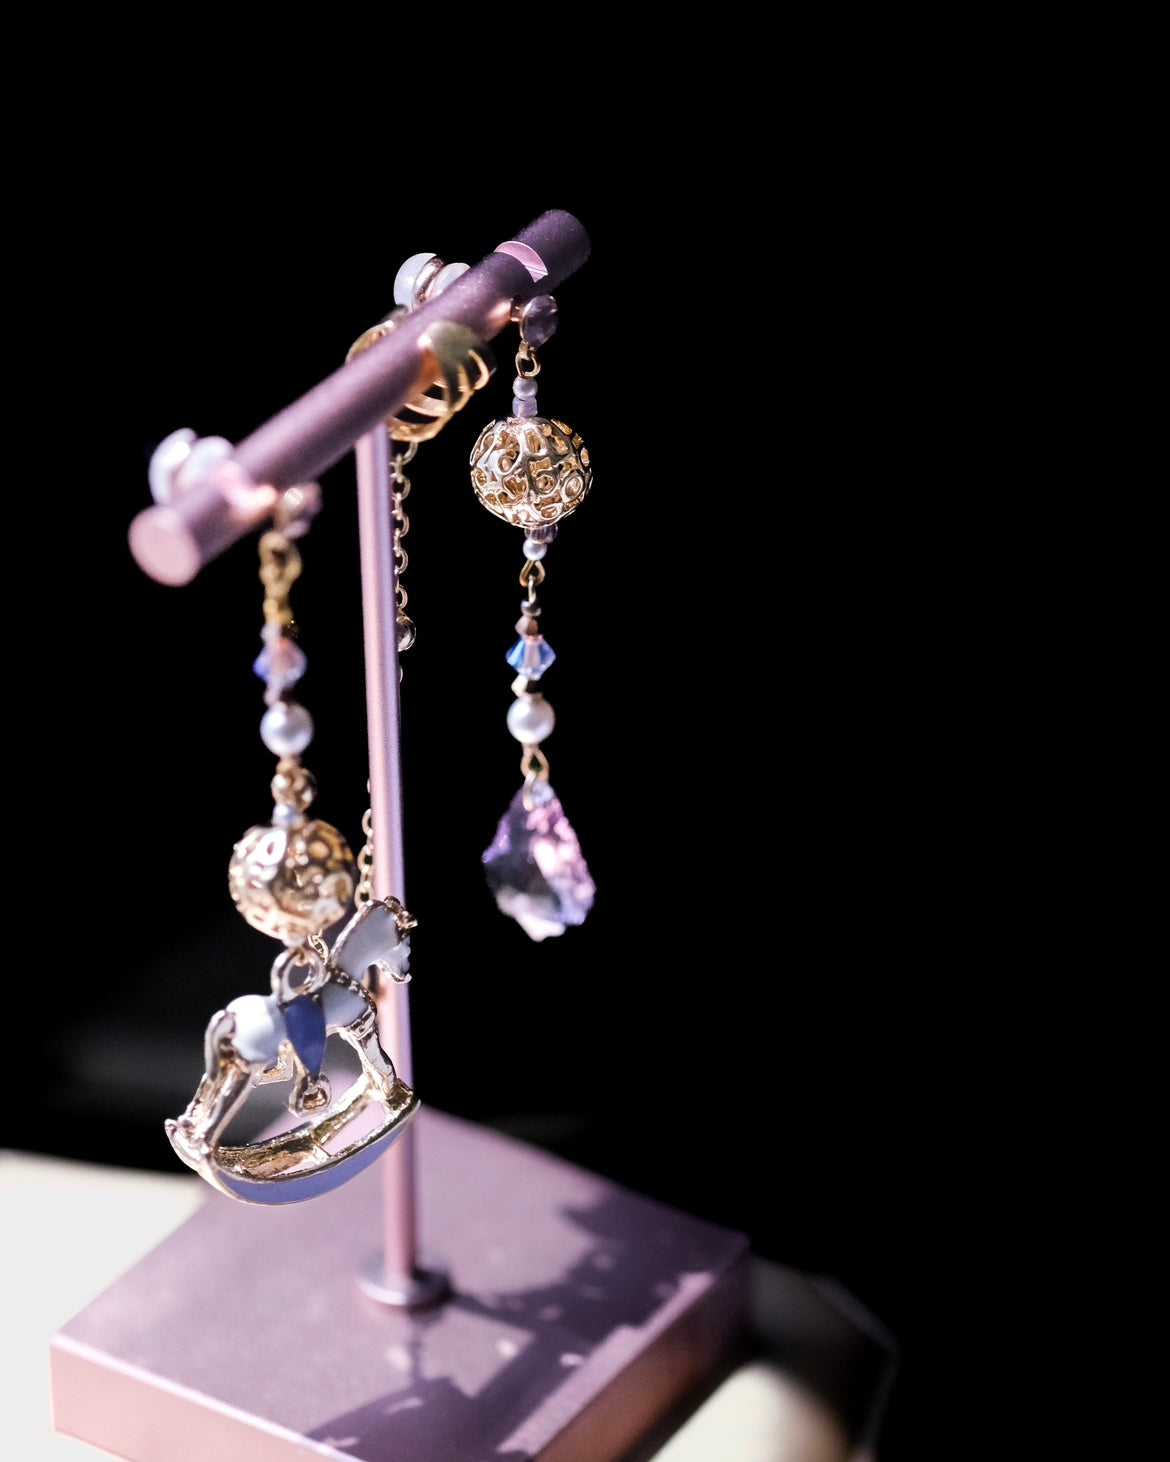 MERRY-GO-ROUND木馬 - 隱形遊樂園 Collection Peterpan| Original Design, Designer earrings, ear cuff with dangling earrings, Swarovski Crystal